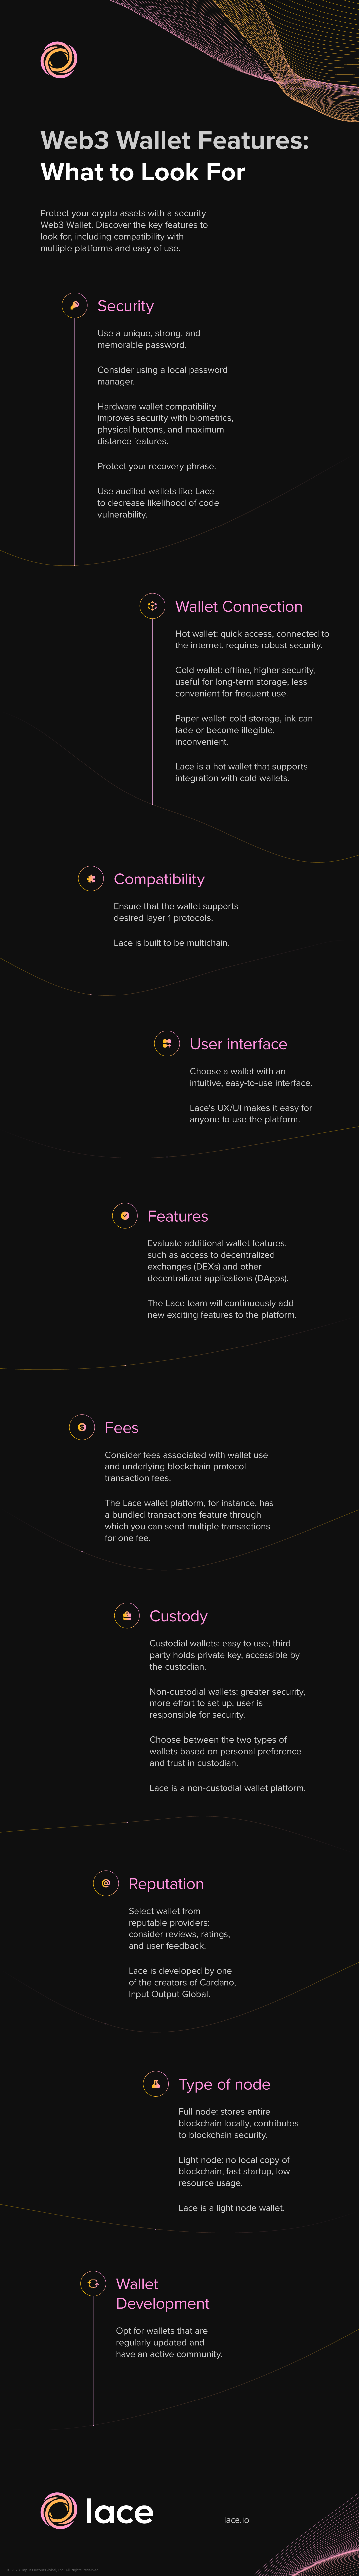 how to choose a web3 wallet infographic